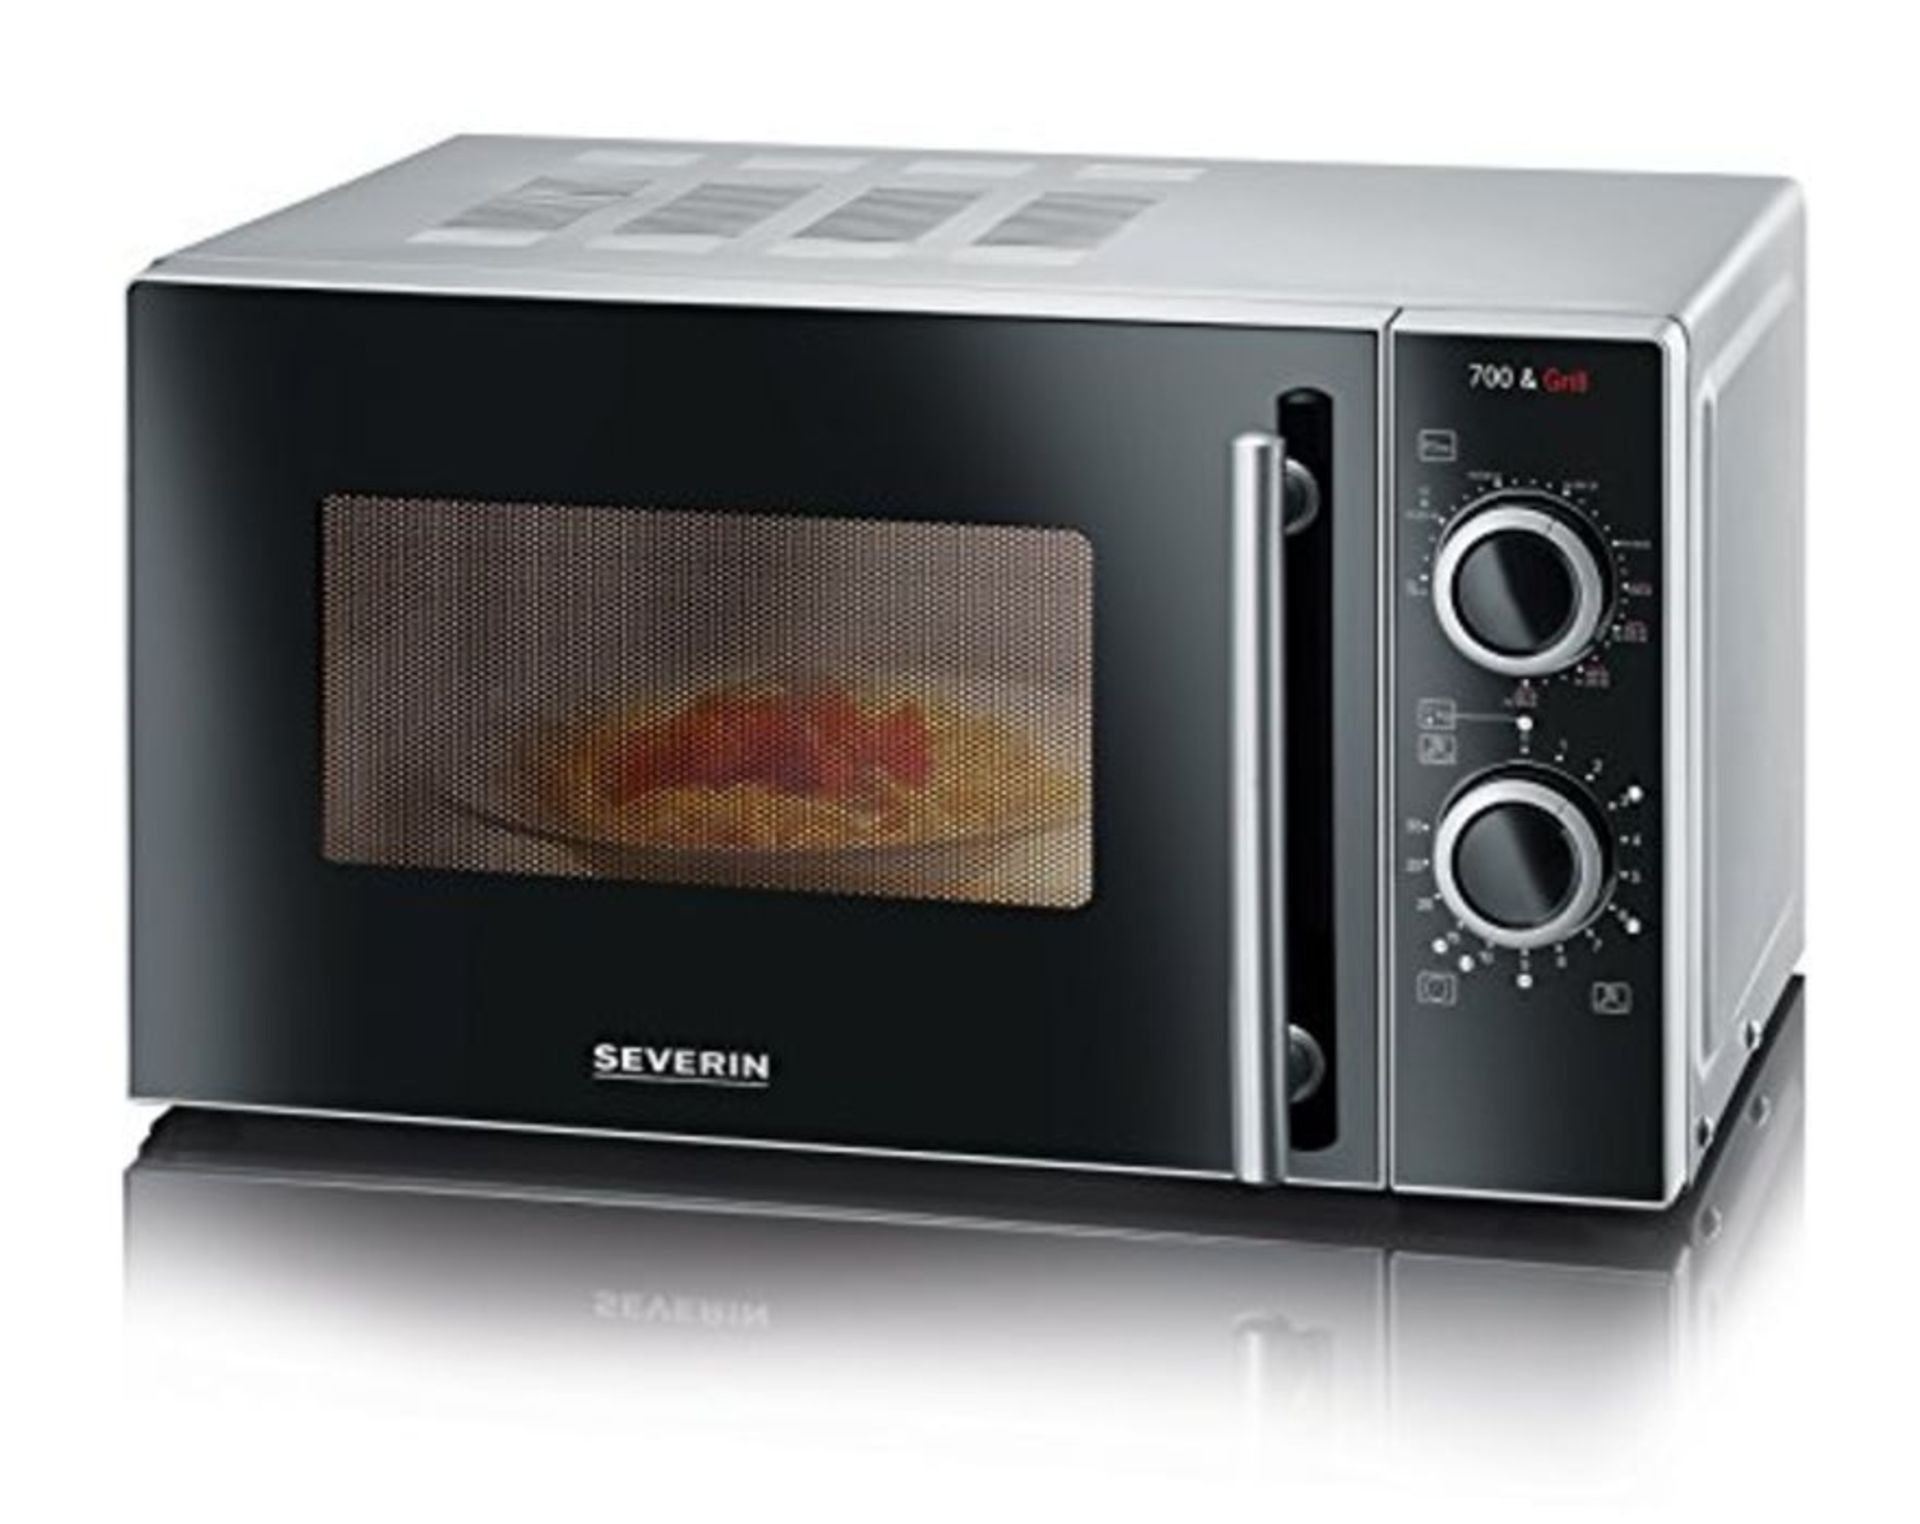 RRP £84.00 Severin Microwave with Grill MW 7875, Silver